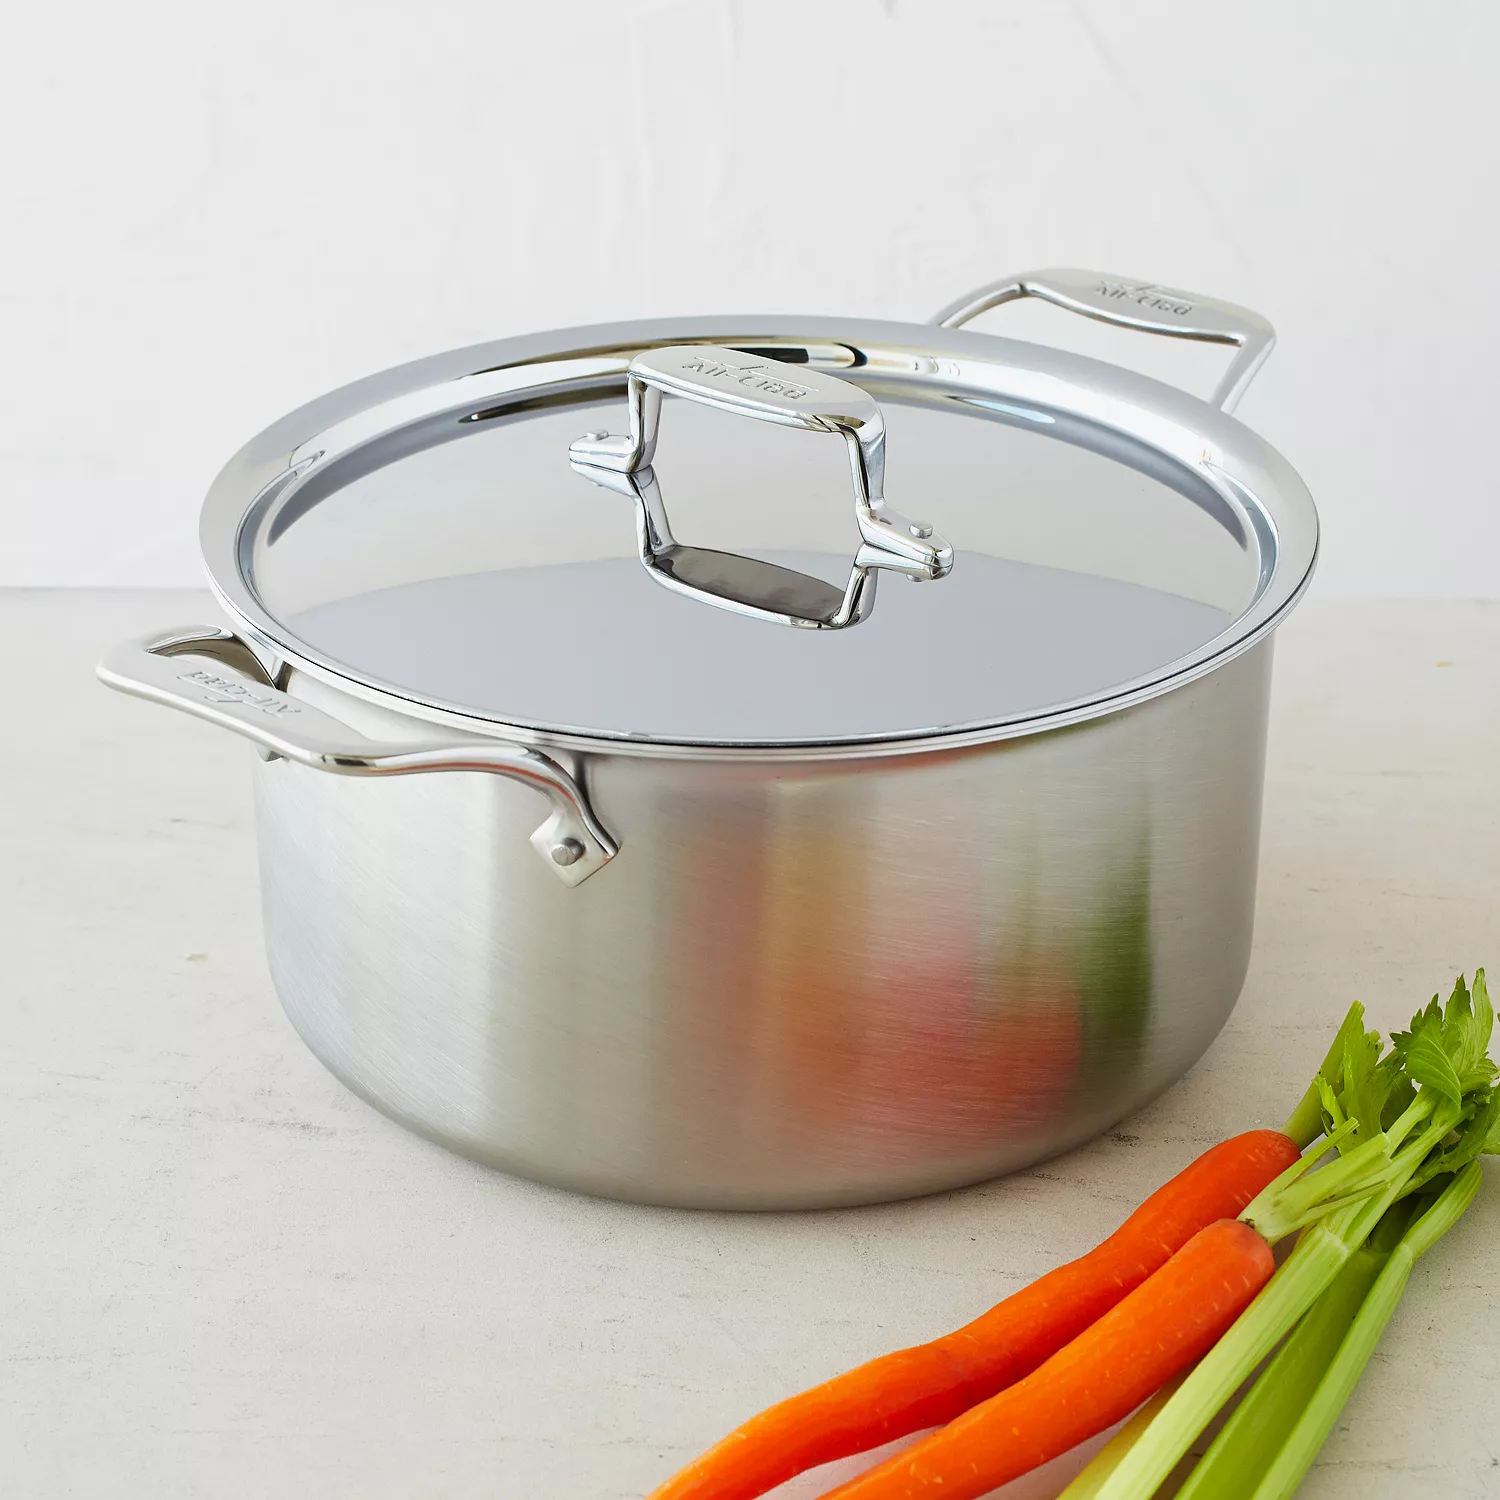 All-Clad d5 Brushed Stainless-Steel Stock Pot